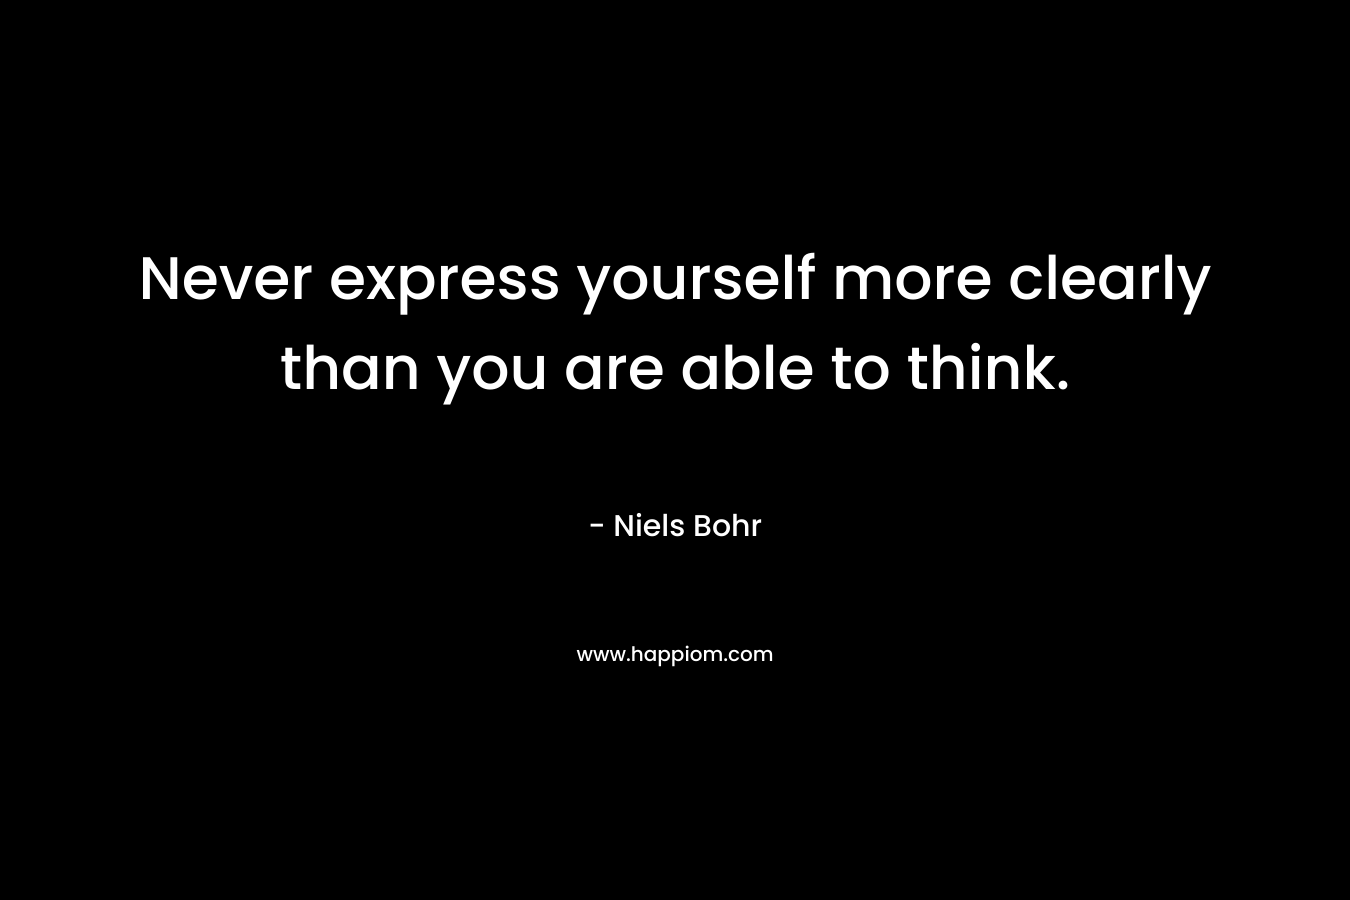 Never express yourself more clearly than you are able to think. – Niels Bohr